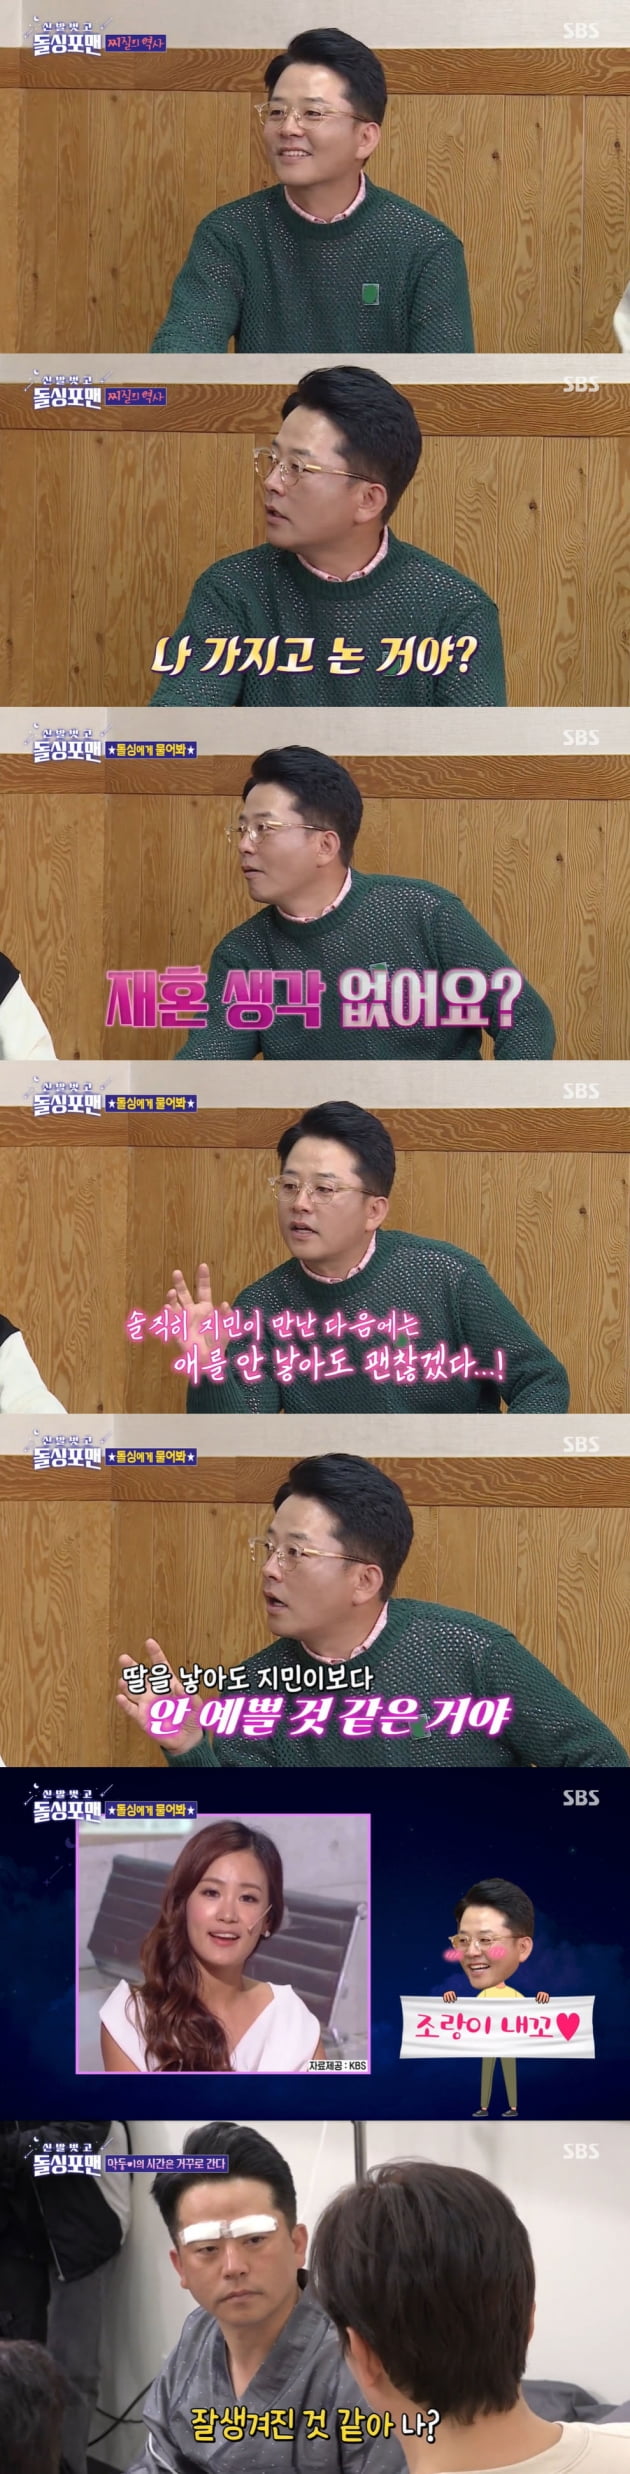 The comedian Kim Jun-ho revealed his thoughts about marriage as well as love with Kim Jimin.Kim Jun-ho, who became a dolling after suffering the pain of divorce, admitted to dating Kim Jin on the 3rd.As I had made love with Kim Jin, who had been in love for a long time, I was seriously and carefully thinking about the happy future to spend with her.In the SBS entertainment Shoes Take Off and Dolling Forman broadcast on the 26th, Kim Jun-ho confided in his girlfriend Kim Jin and future and plans for the second generation.What would Jimin say if he asked me to break up first? asked members of Dolsing Forman who were confident that theres nothing to break up with.Jimin is very old and has a lot of opposition, so it is hard to finish it at this point, he said.Kim Jun-ho said, Are you playing with me? And then he said, What do I do? I will do eye surgery and become younger.Even his expression was depressed by the imagination of parting with Kim.Kim Jun-ho also revealed his thoughts about Kim Jimin and his remarriage, the second-generation plan; Kim Jun-ho said: Im 48.I originally thought I should have a child in my life unconditionally, but honestly, after Jimin met, I changed my mind that I would not have to have a child.Even if I have a daughter, Jimin is not more beautiful. Kim Jun-ho, nine years older than Kim Jimin, also had an eyelid surgery to look younger; Kim Jun-ho said: Would you like to take care of the disease?It is Couple who is next to me when I am sick. I now receive a comprehensive checkup with Jimin.Kim Jun-ho, who was on the operating table, mumbled I love Jimin as she became sleepy due to a sleeping anesthetic.Kim Jun-ho, who came out of the surgery, expressed his expectation to his members, saying, Do you think Im handsome?Kim Jun-ho also revealed that she had a marriage idea with Kim Jimin on the 19th broadcast. Kim Jun-ho said, I also get skin care these days.I am also wiping a lot of teeth, he said, boldly choosing Kim Jin when asked Dolling Forman and choose one of love. I will raise funds for marriage, said the joker, who said, I will raise money for marriage.Kim Jin also mentioned the future of designing with Kim Jun-ho as if it were a joke.In the SBS entertainment House Band, which was broadcast on the 22nd, Kim Jimin said, In fact, during the first broadcast of House Band, I have been pledging to reveal (Kim Jun-ho and devotion) to sacrifice one body for our pro.But Park announced his marriage, he said.Park said, If you get married, you should leave your honeymoon home to the House Band. Kim Jimin said, By then, it will be about time for Season 2, he said.Kim Jun-ho was born in 1975, aged 48, and Kim Jimin was born in 1984, aged 39 this year.Kim Jun-ho will be more cautious about meeting as Kim Jun-ho is fifty and Kim Jin is forty.The two people use their love as a gag material as a comedian in the broadcast, but on the contrary, it is a deep relationship, so it is a proof of confidence that it does not shake even if it is mentioned lightly.Kim Jun-ho and Kim Jin are also seniors who have been strong in their difficult times.Kim Jun-ho has said on the air several times that Kim Jimin has taken care of since he was an aspiring gag woman.When Kim Jun-ho was in trouble due to the embezzlement of funds by co-president Kim, who had been running in the past, Kim Jin publicly conveyed a message of support for Kim Jun-ho after winning the entertainment prize.The pair also met gag breathing as an elderly couple at the Gag Concert Yolo Minbak corner after Kim Jun-hos divorce in 2018.The two gag couples became a real-life couple who pictured each others lives together: Kim Jun-ho, a dolsing, and Kim Jin, who even changed his values for the second generation.This is why it is expected that the future will soon be the future where the two people live under one roof and have a family together.